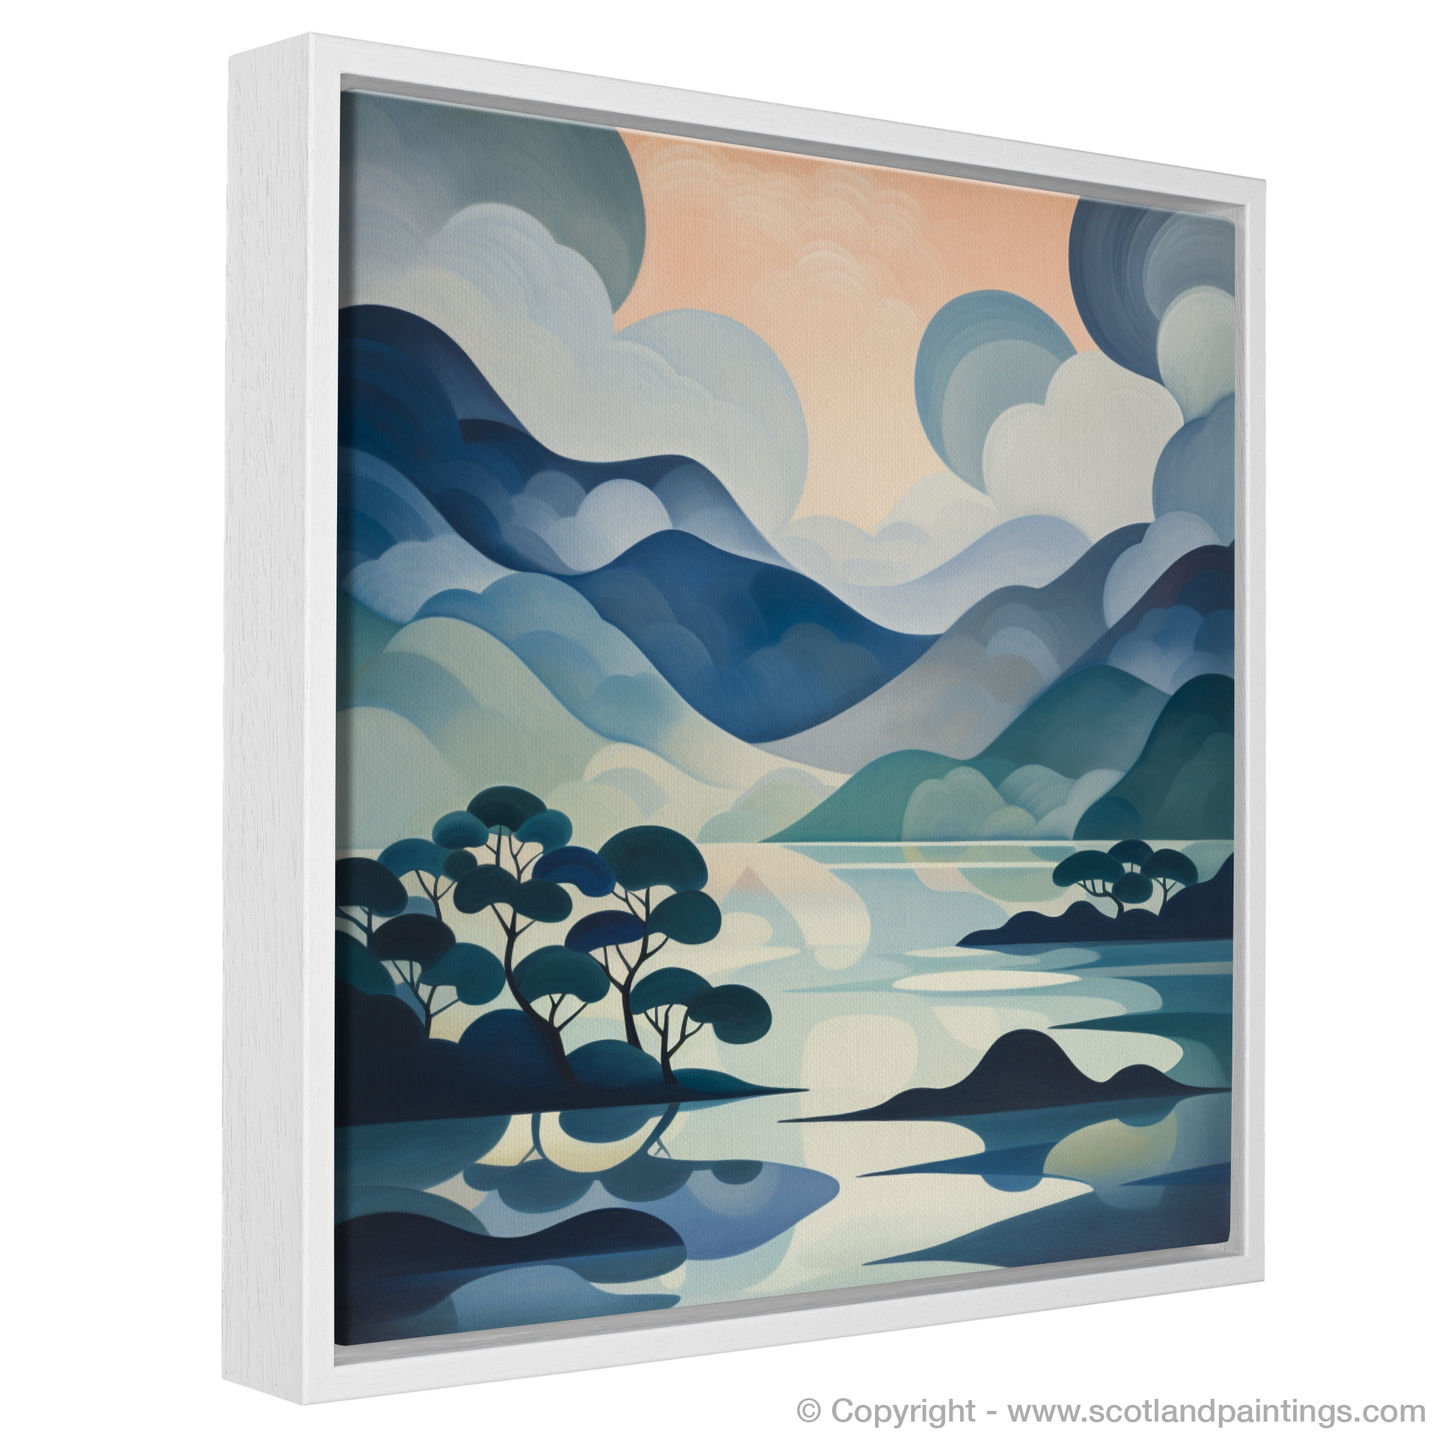 Painting and Art Print of Misty morning on Loch Lomond entitled "Misty Morning Abstract: Loch Lomond Enigma".